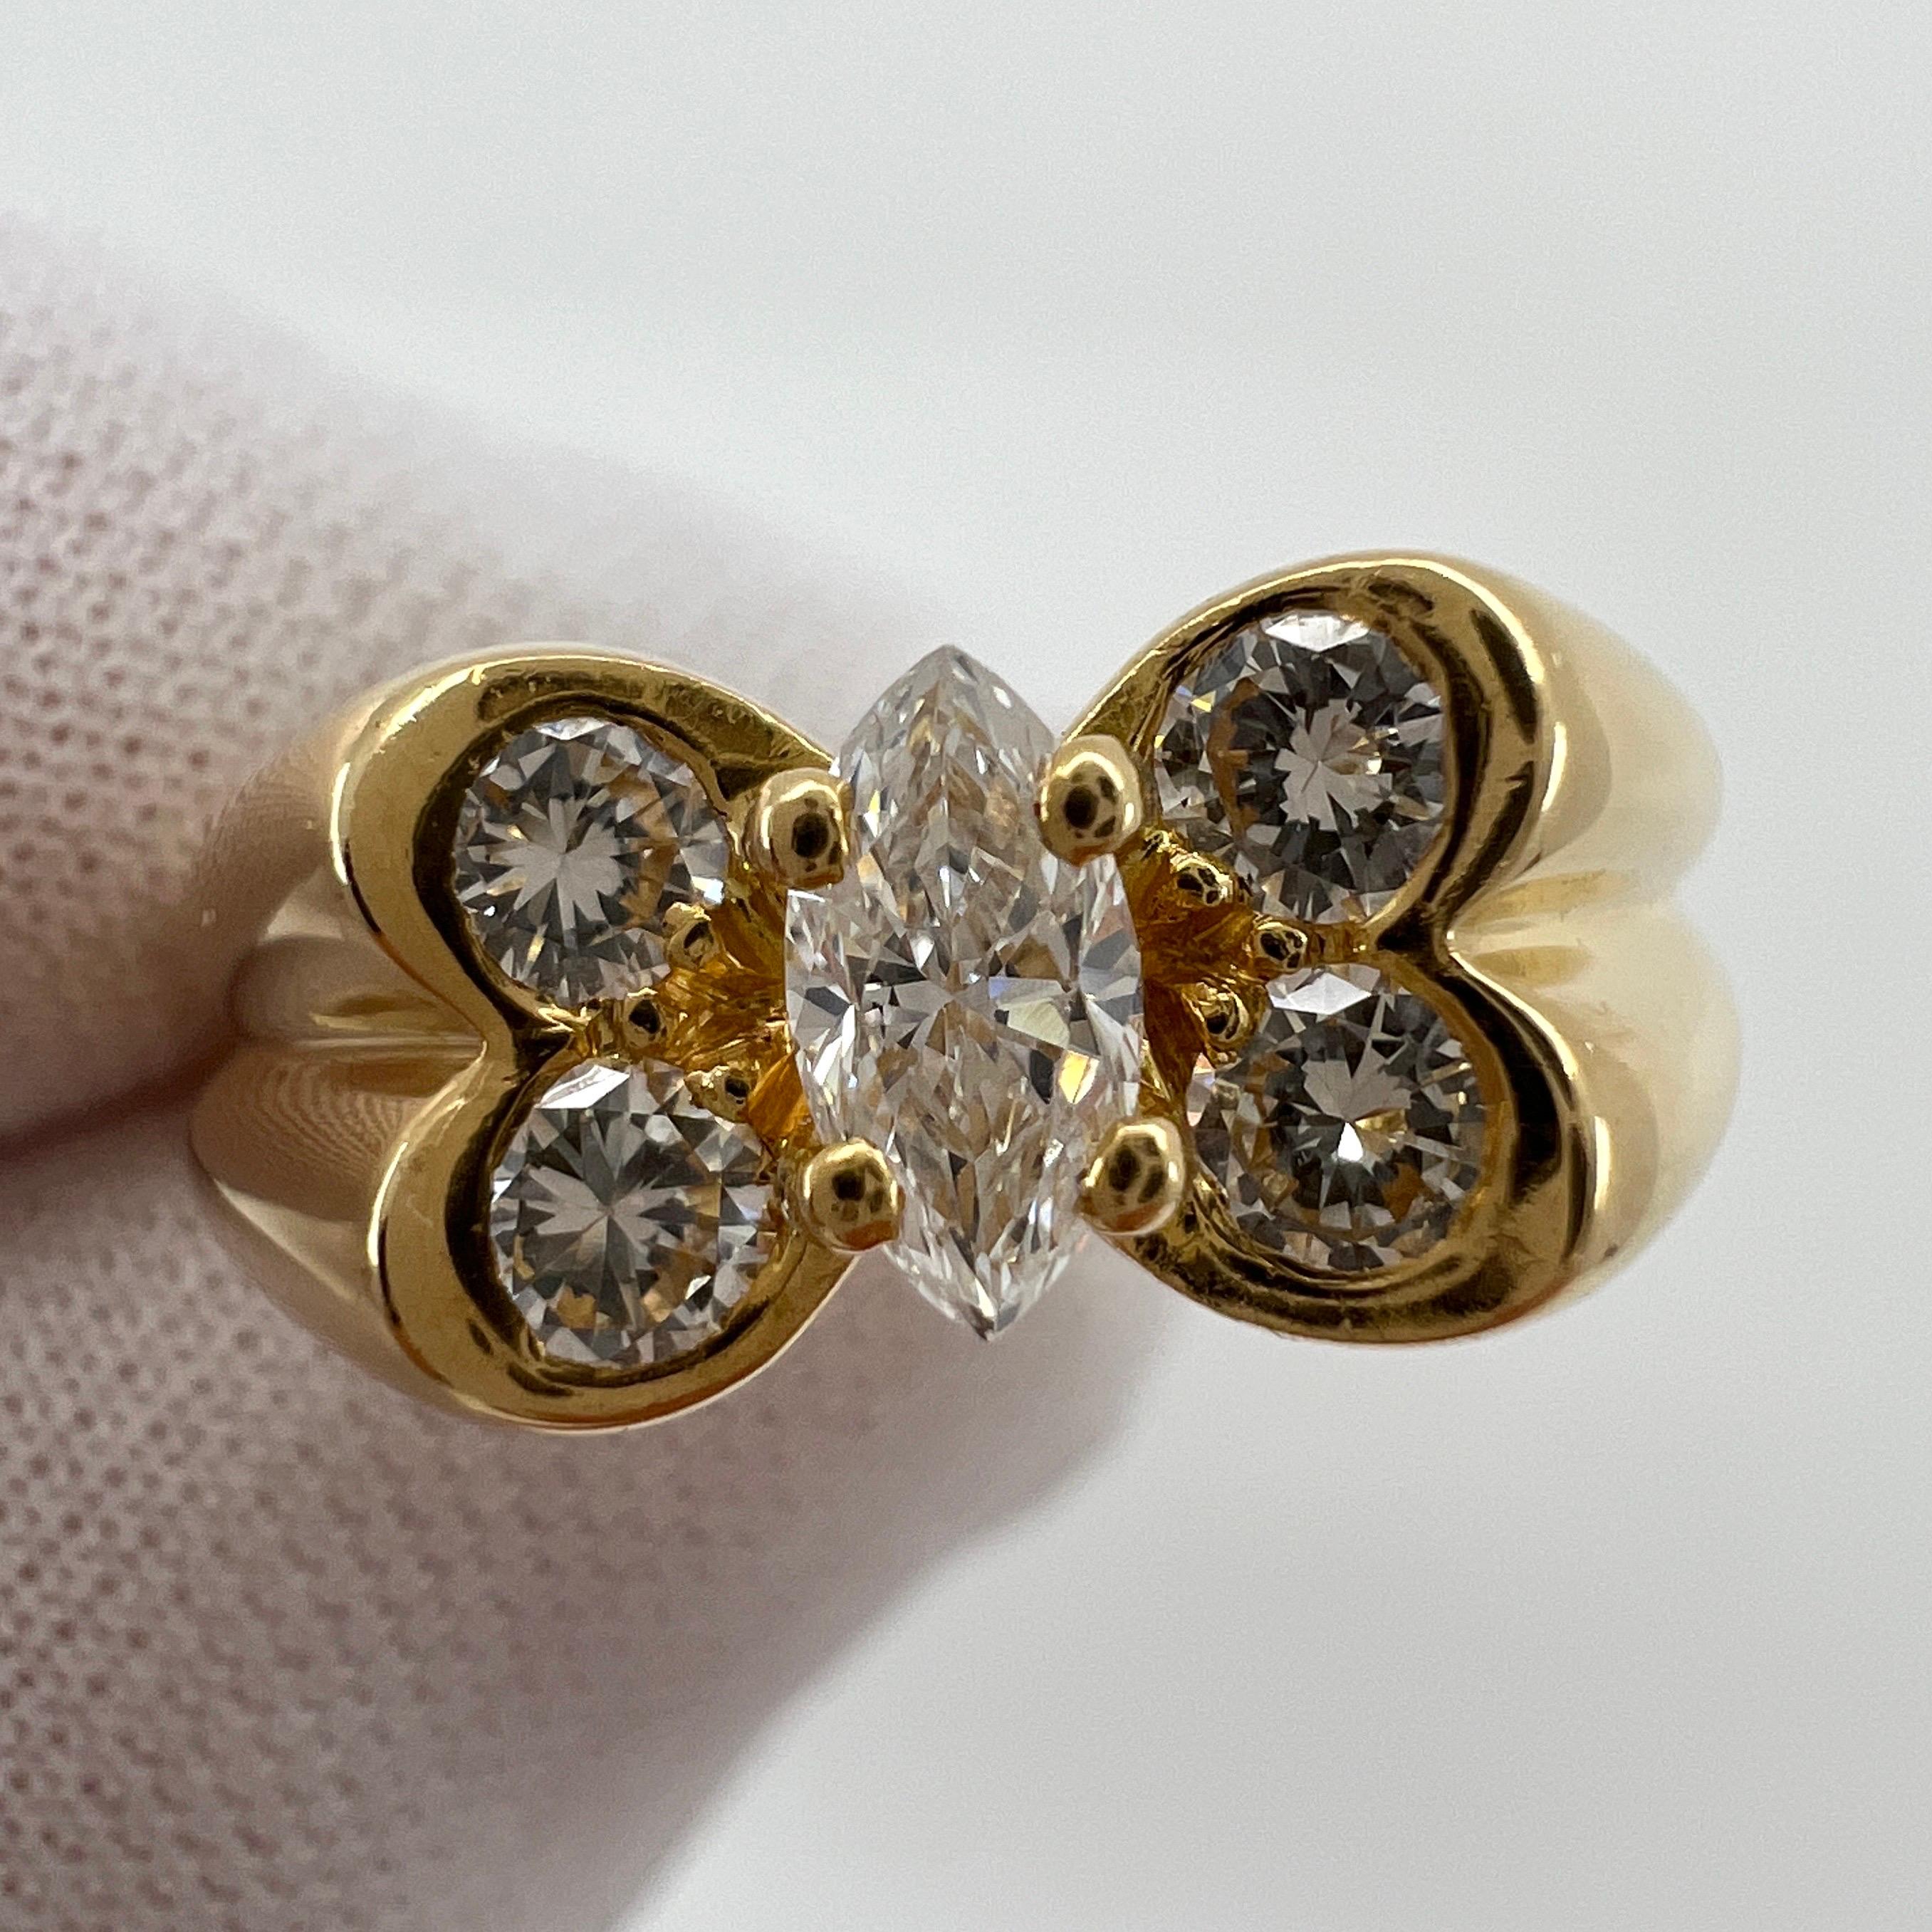 Rare Vintage Van Cleef & Arpels Diamond 18k Yellow Gold Ring.

A stunning vintage ring with a unique design typical of Van Cleef & Arpels, set with approx. 0.60ct of fine quality white diamonds. The centre stone being a beautiful marquise/navette